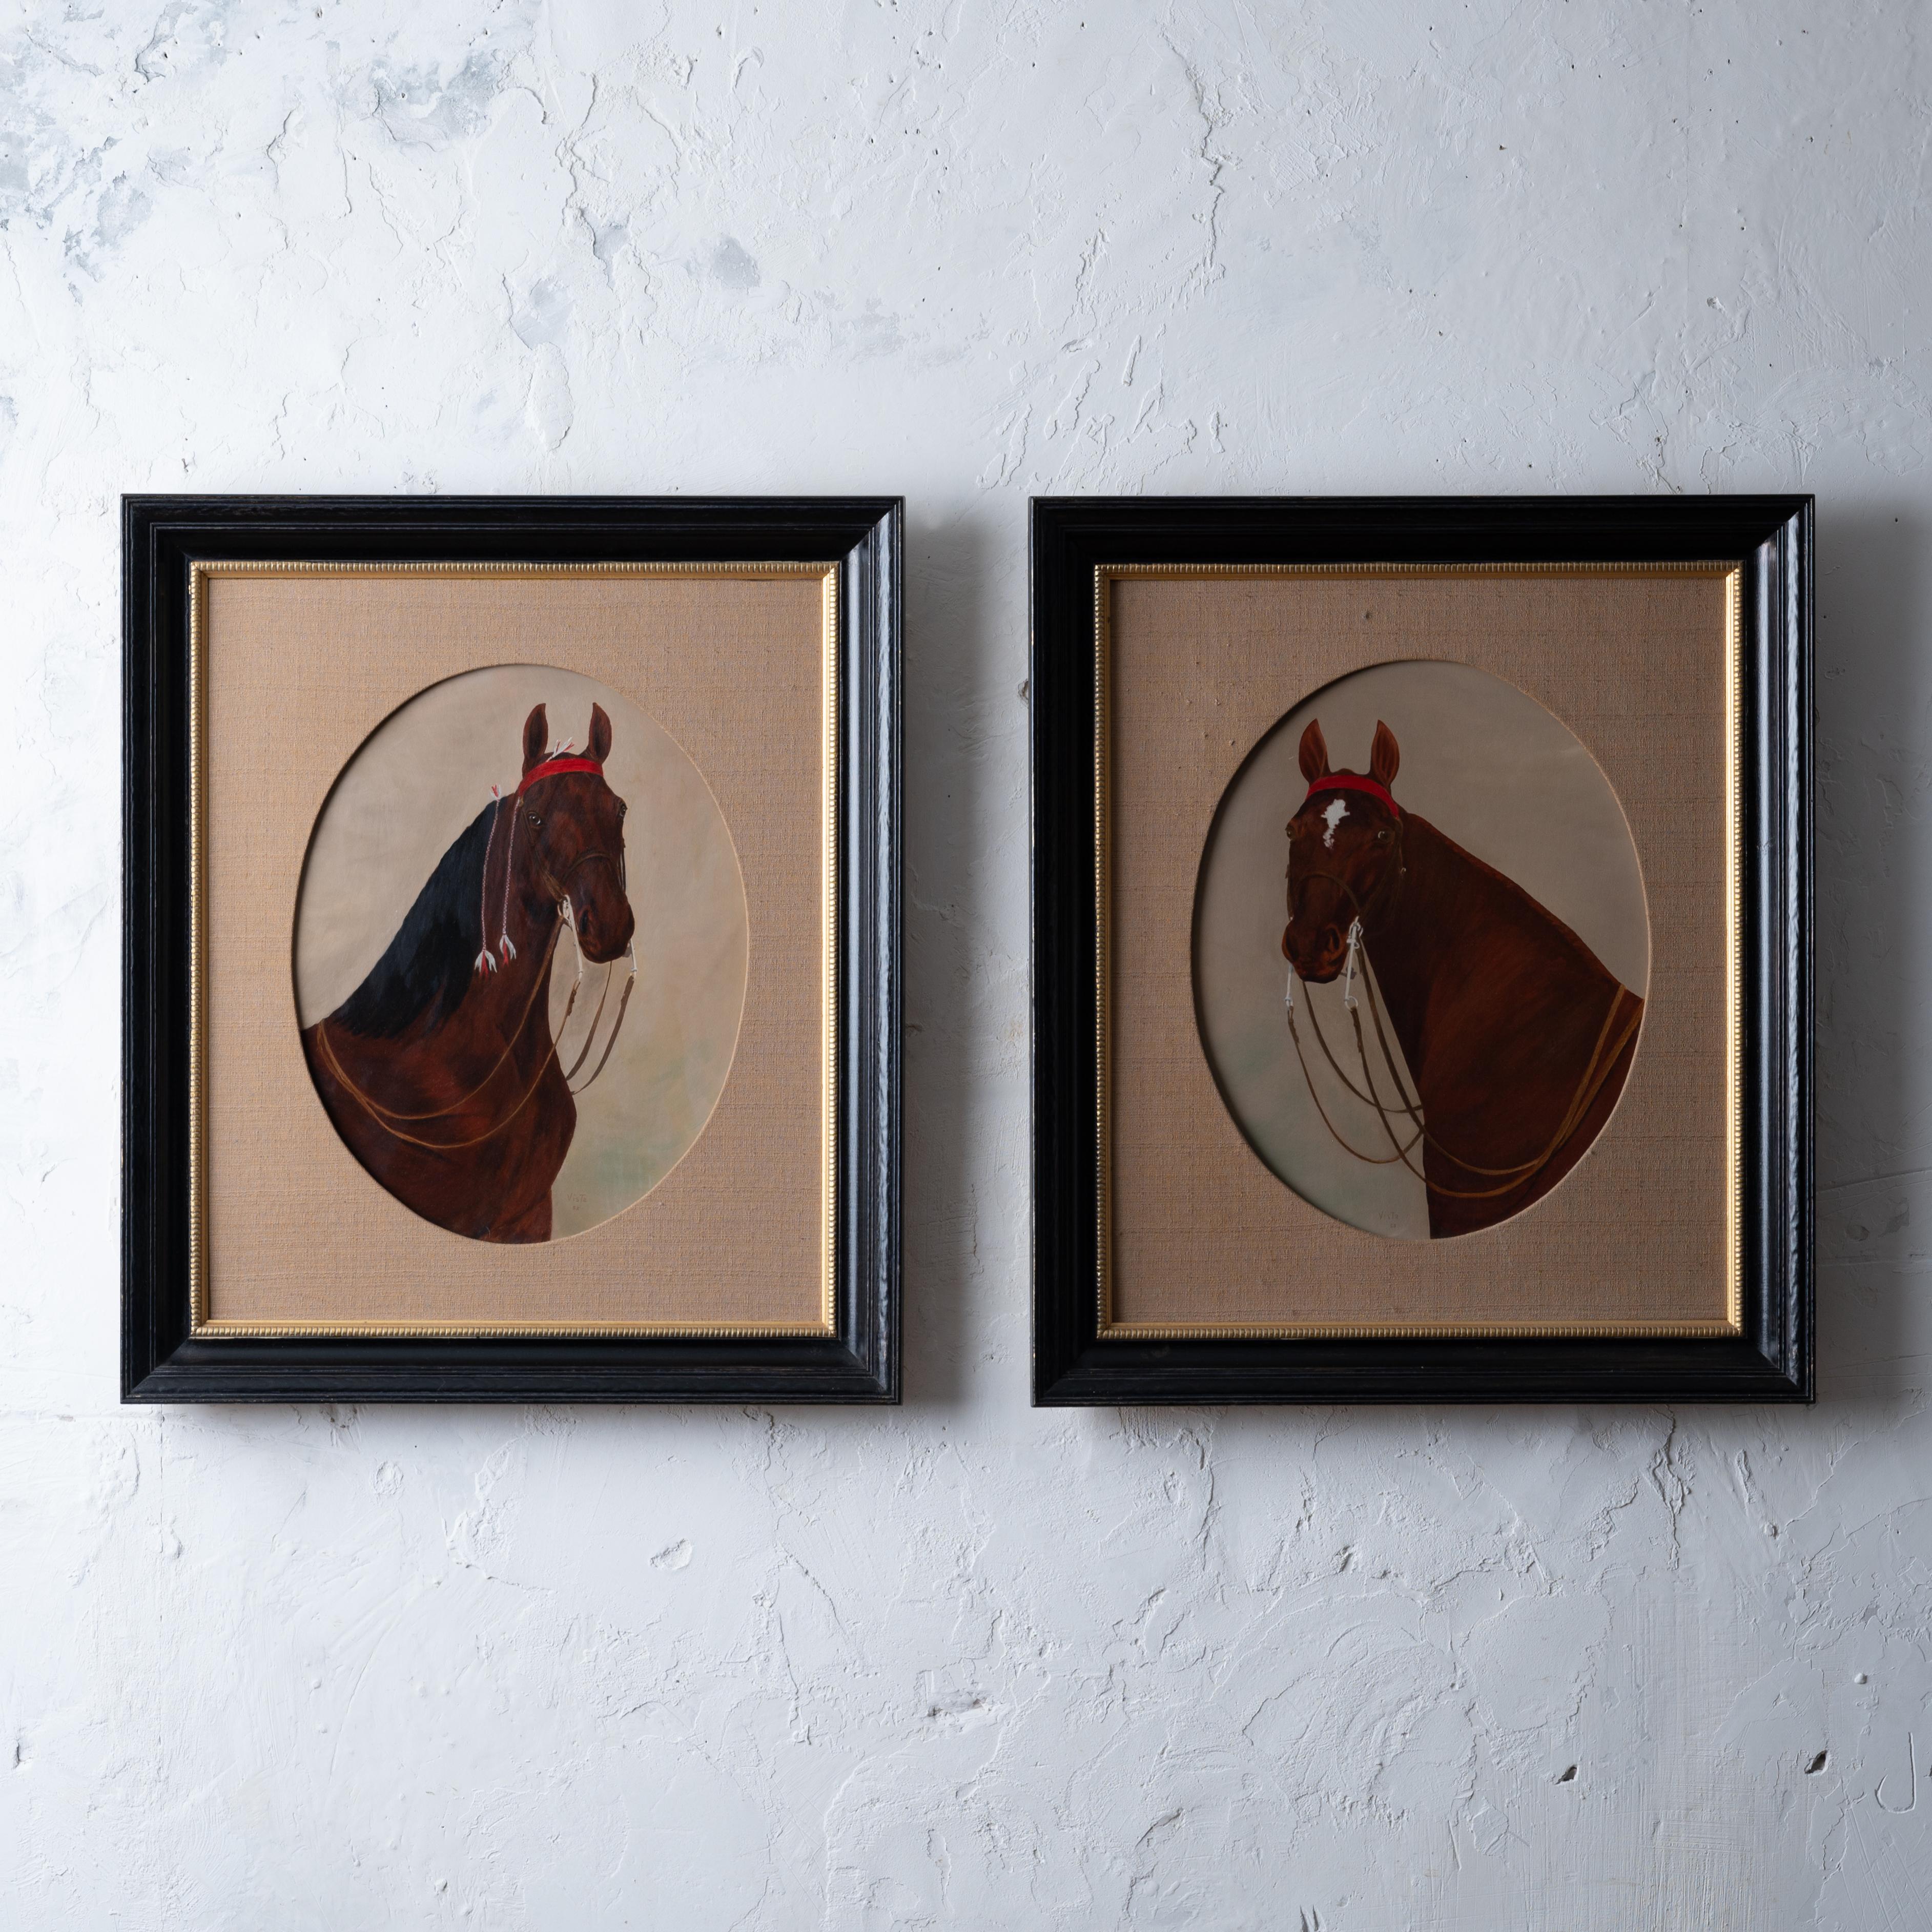 A pair of horse portraits signed Vista, 1955.  
Oil on board mounted under oval linen wrapped mat in ebonized and gilt frames.

sight: 14 ¼ by 18 ¼ inches
frame: 24 ½ by 28 ½ inches

